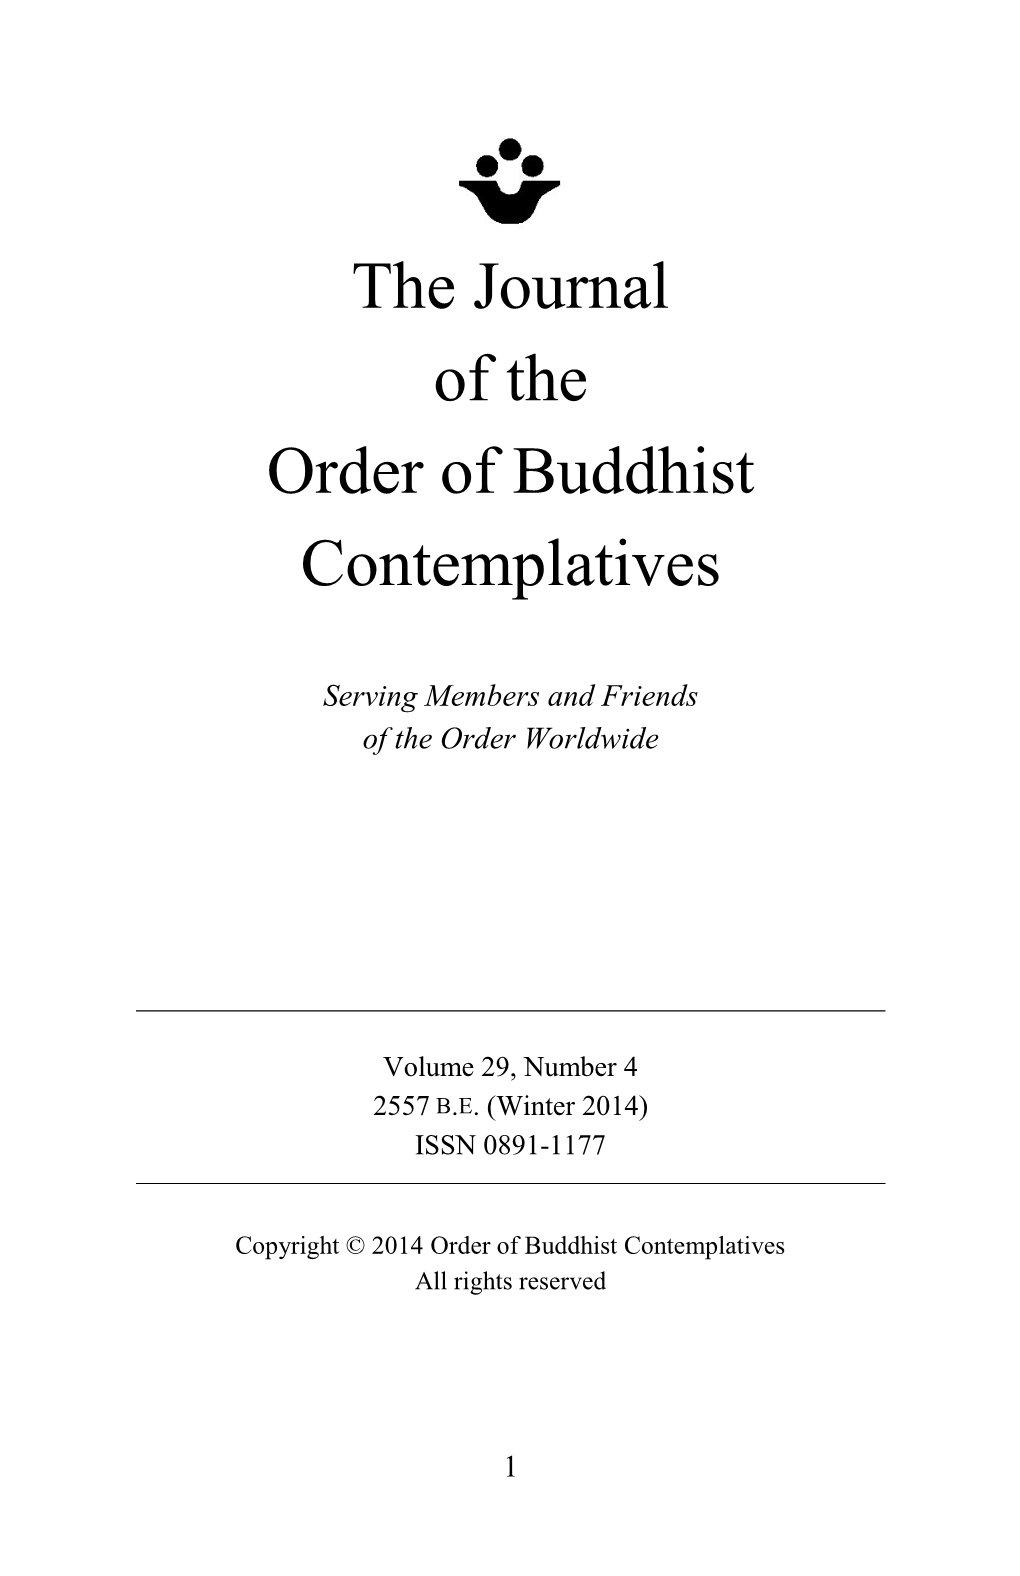 Journal of the Order of Buddhist Contemplatives Winter 2014